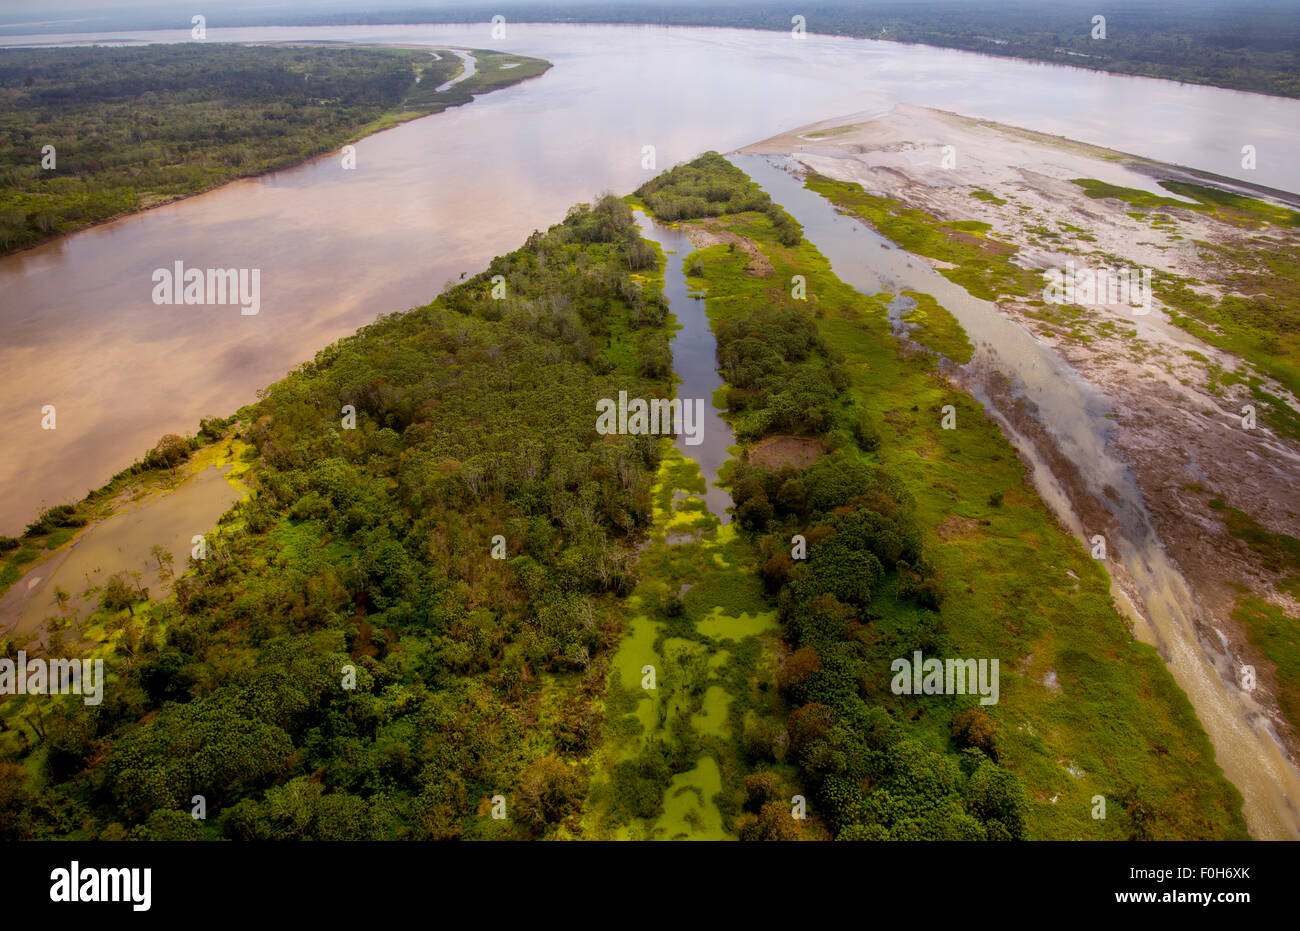 Amazon River aerial, with river island in foreground, near Iquitos, Peru Stock Photo